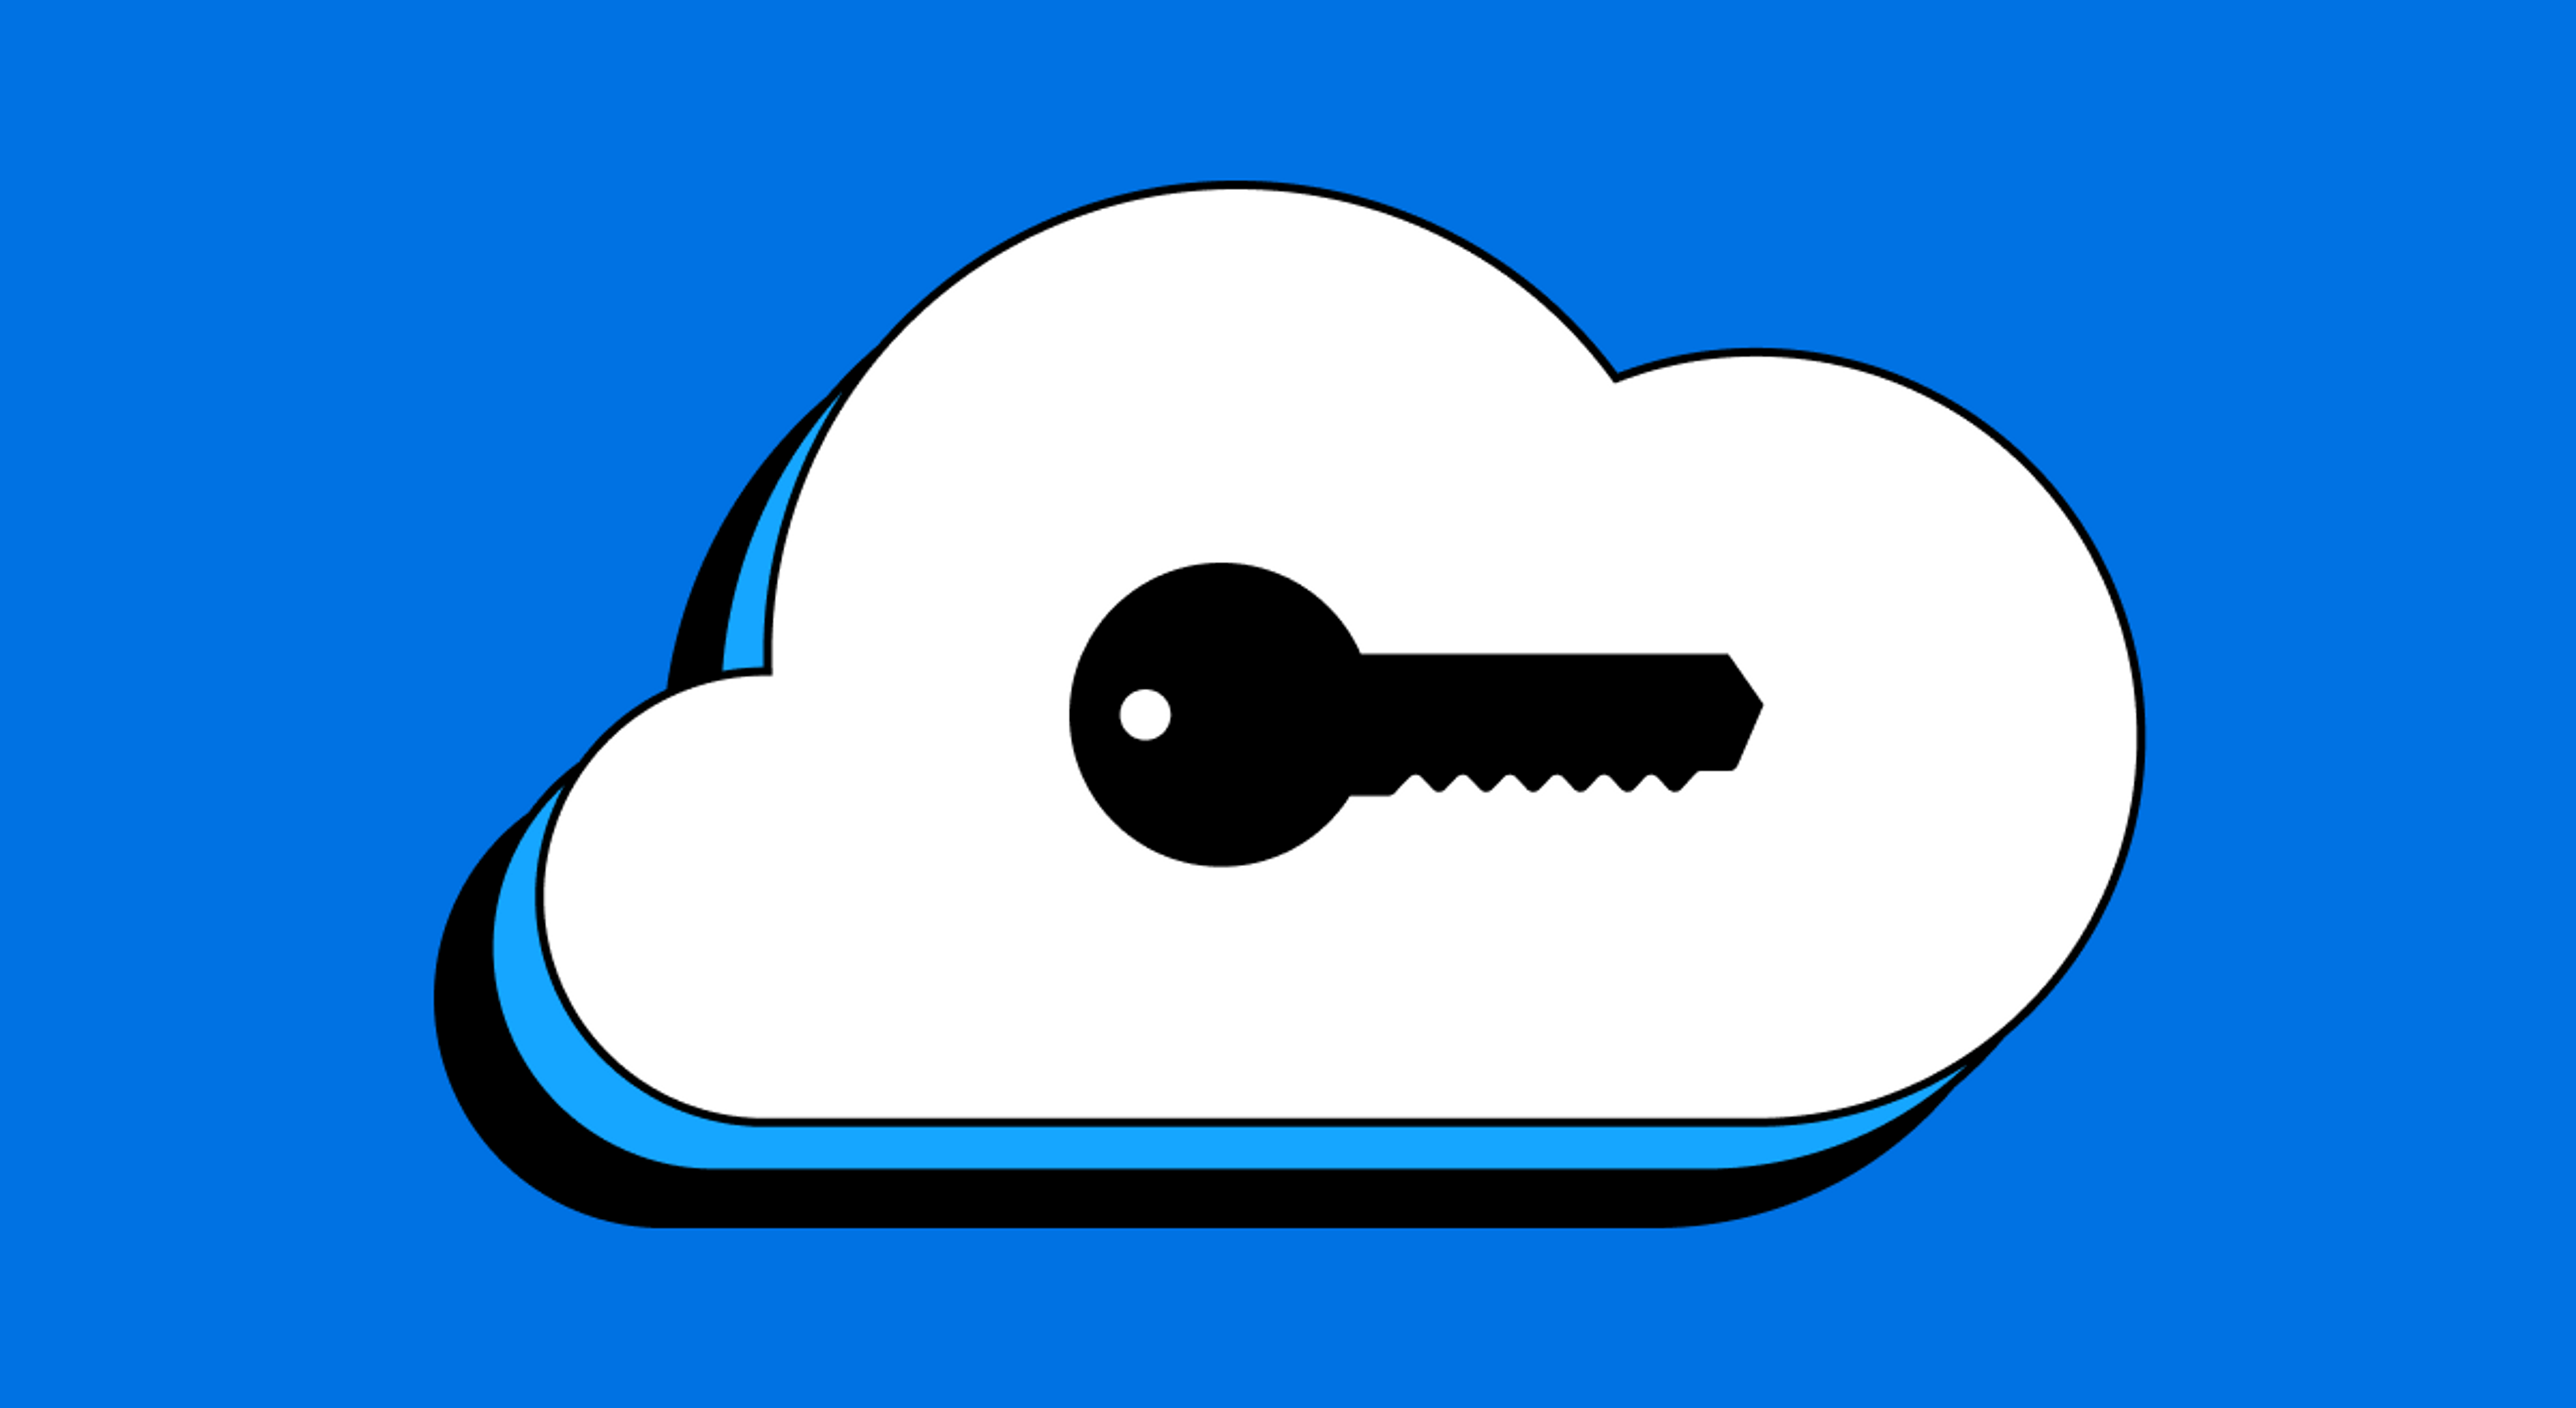 Key in cloud on a blue background